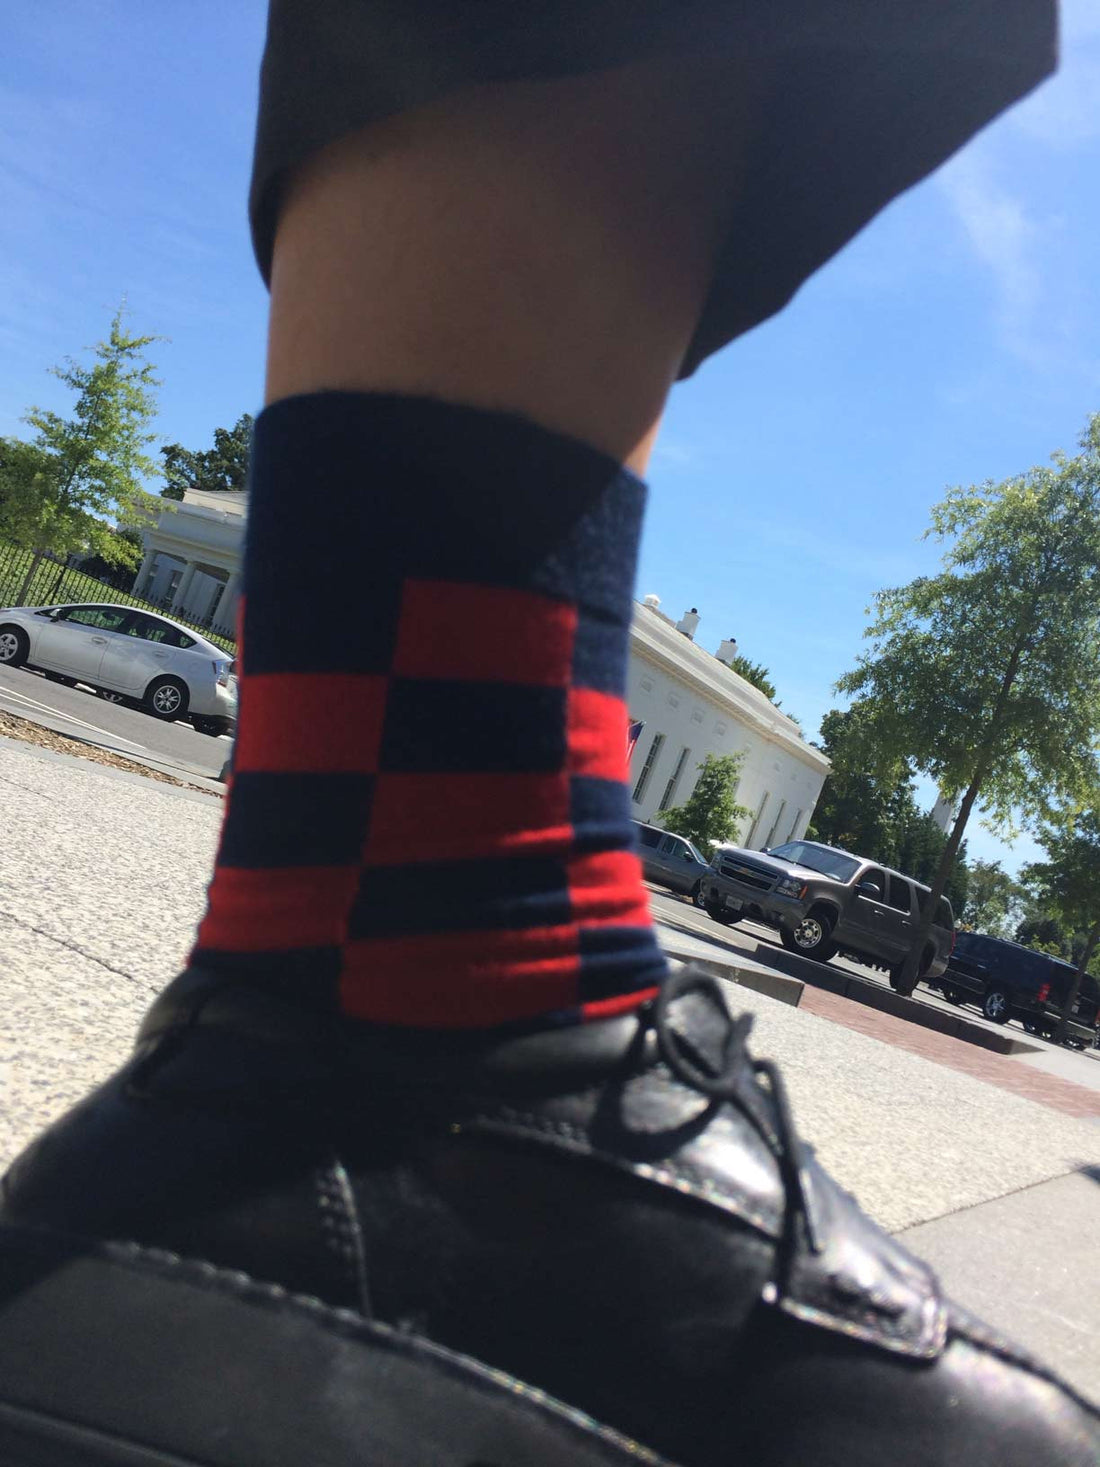 The Checkerboard Socks go to The White House!